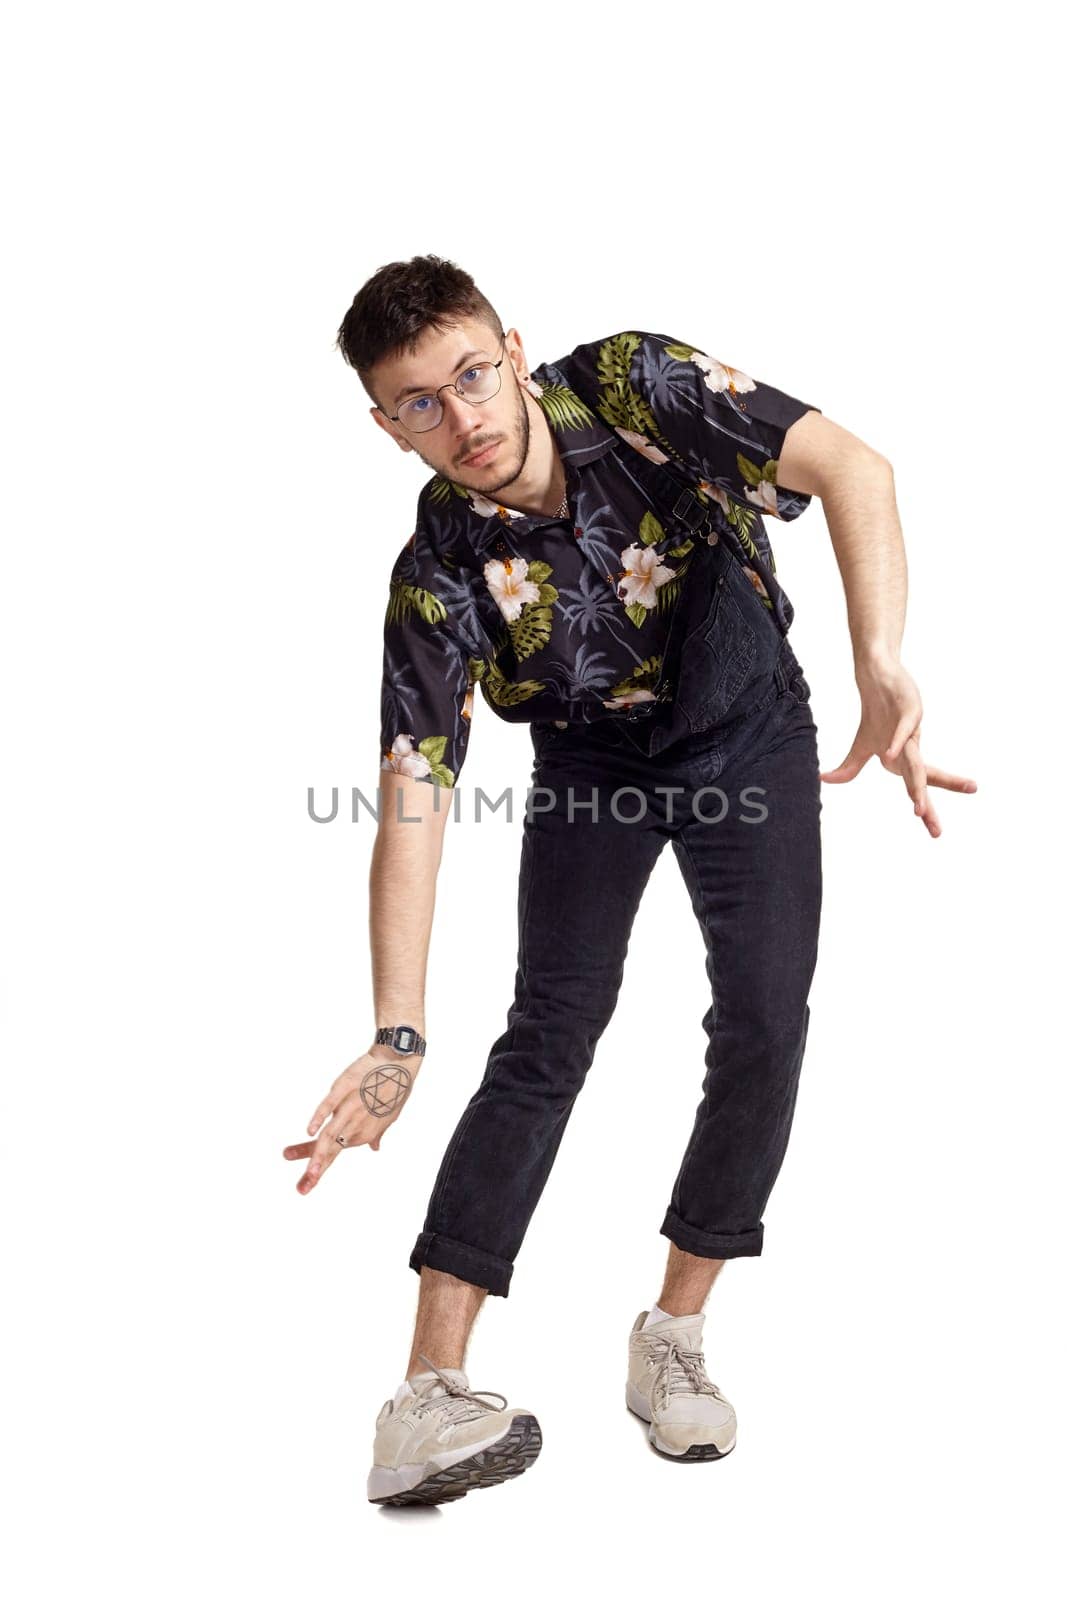 Full-length portrait of a graceful person in glasses, black jumpsuit, colorful t-shirt and gray sneakers fooling around in studio. Indoor photo of a man dancing isolated on white background. Music and imagination. Copy space.